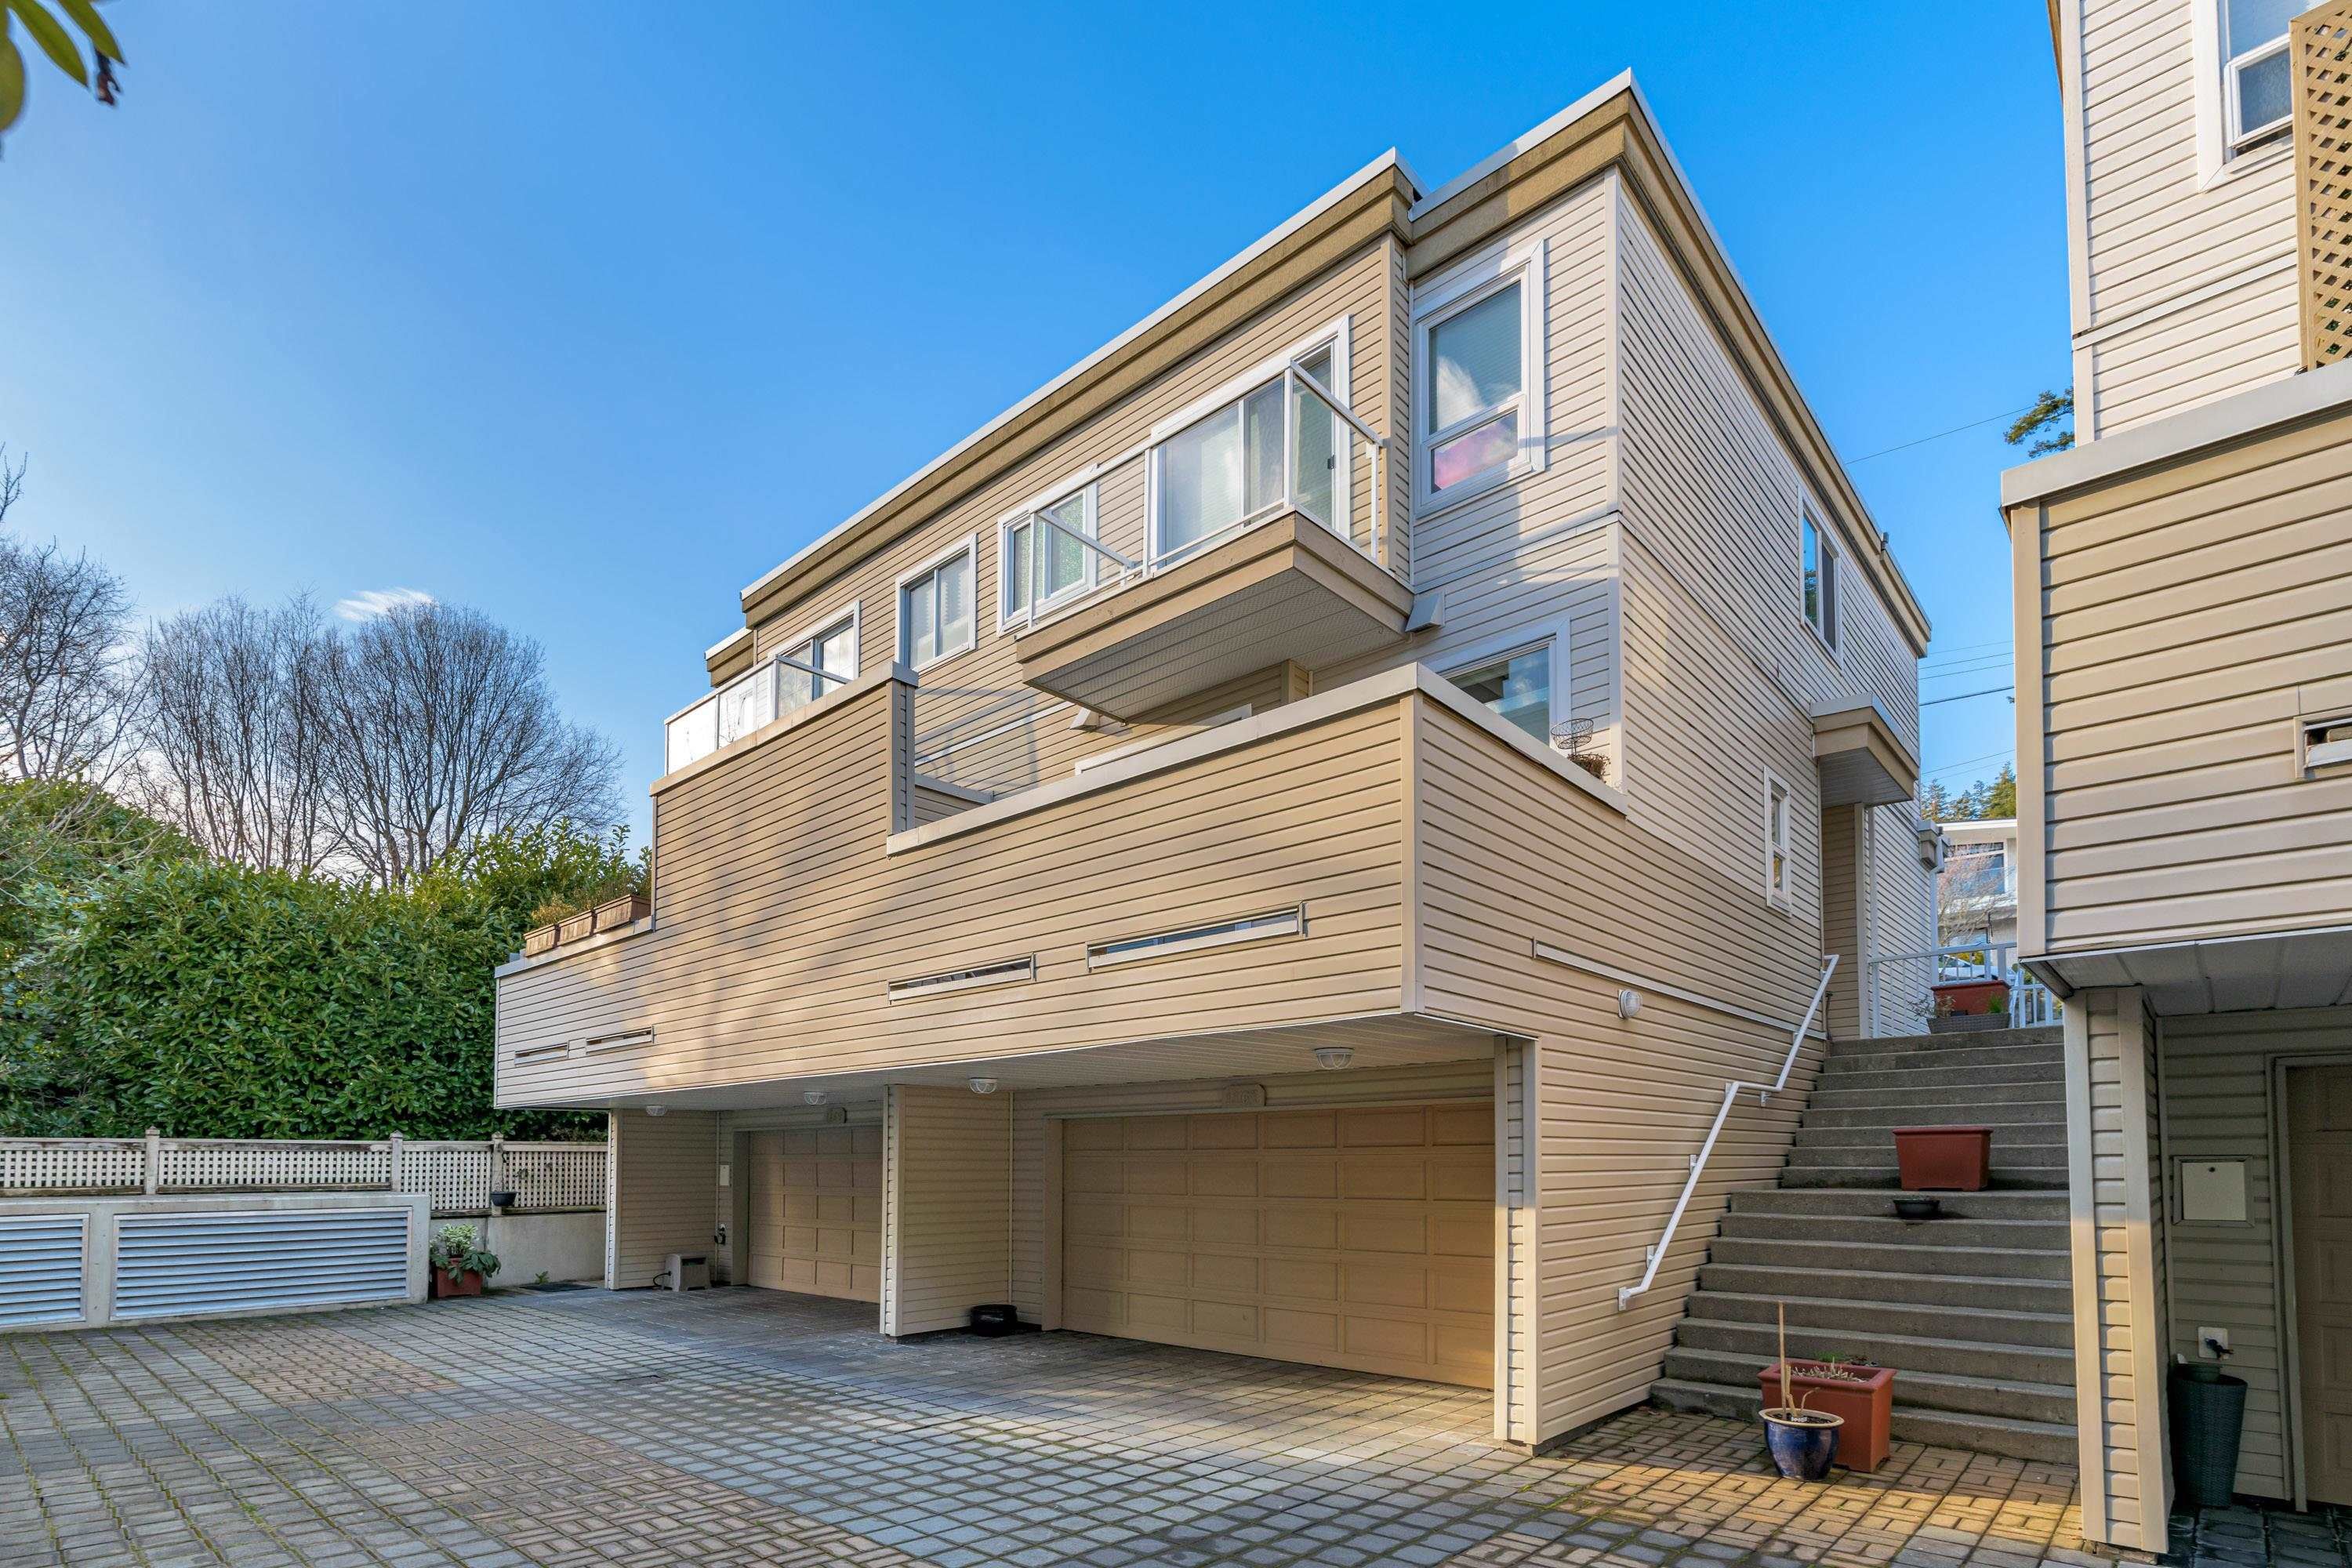 New property listed in White Rock, South Surrey White Rock